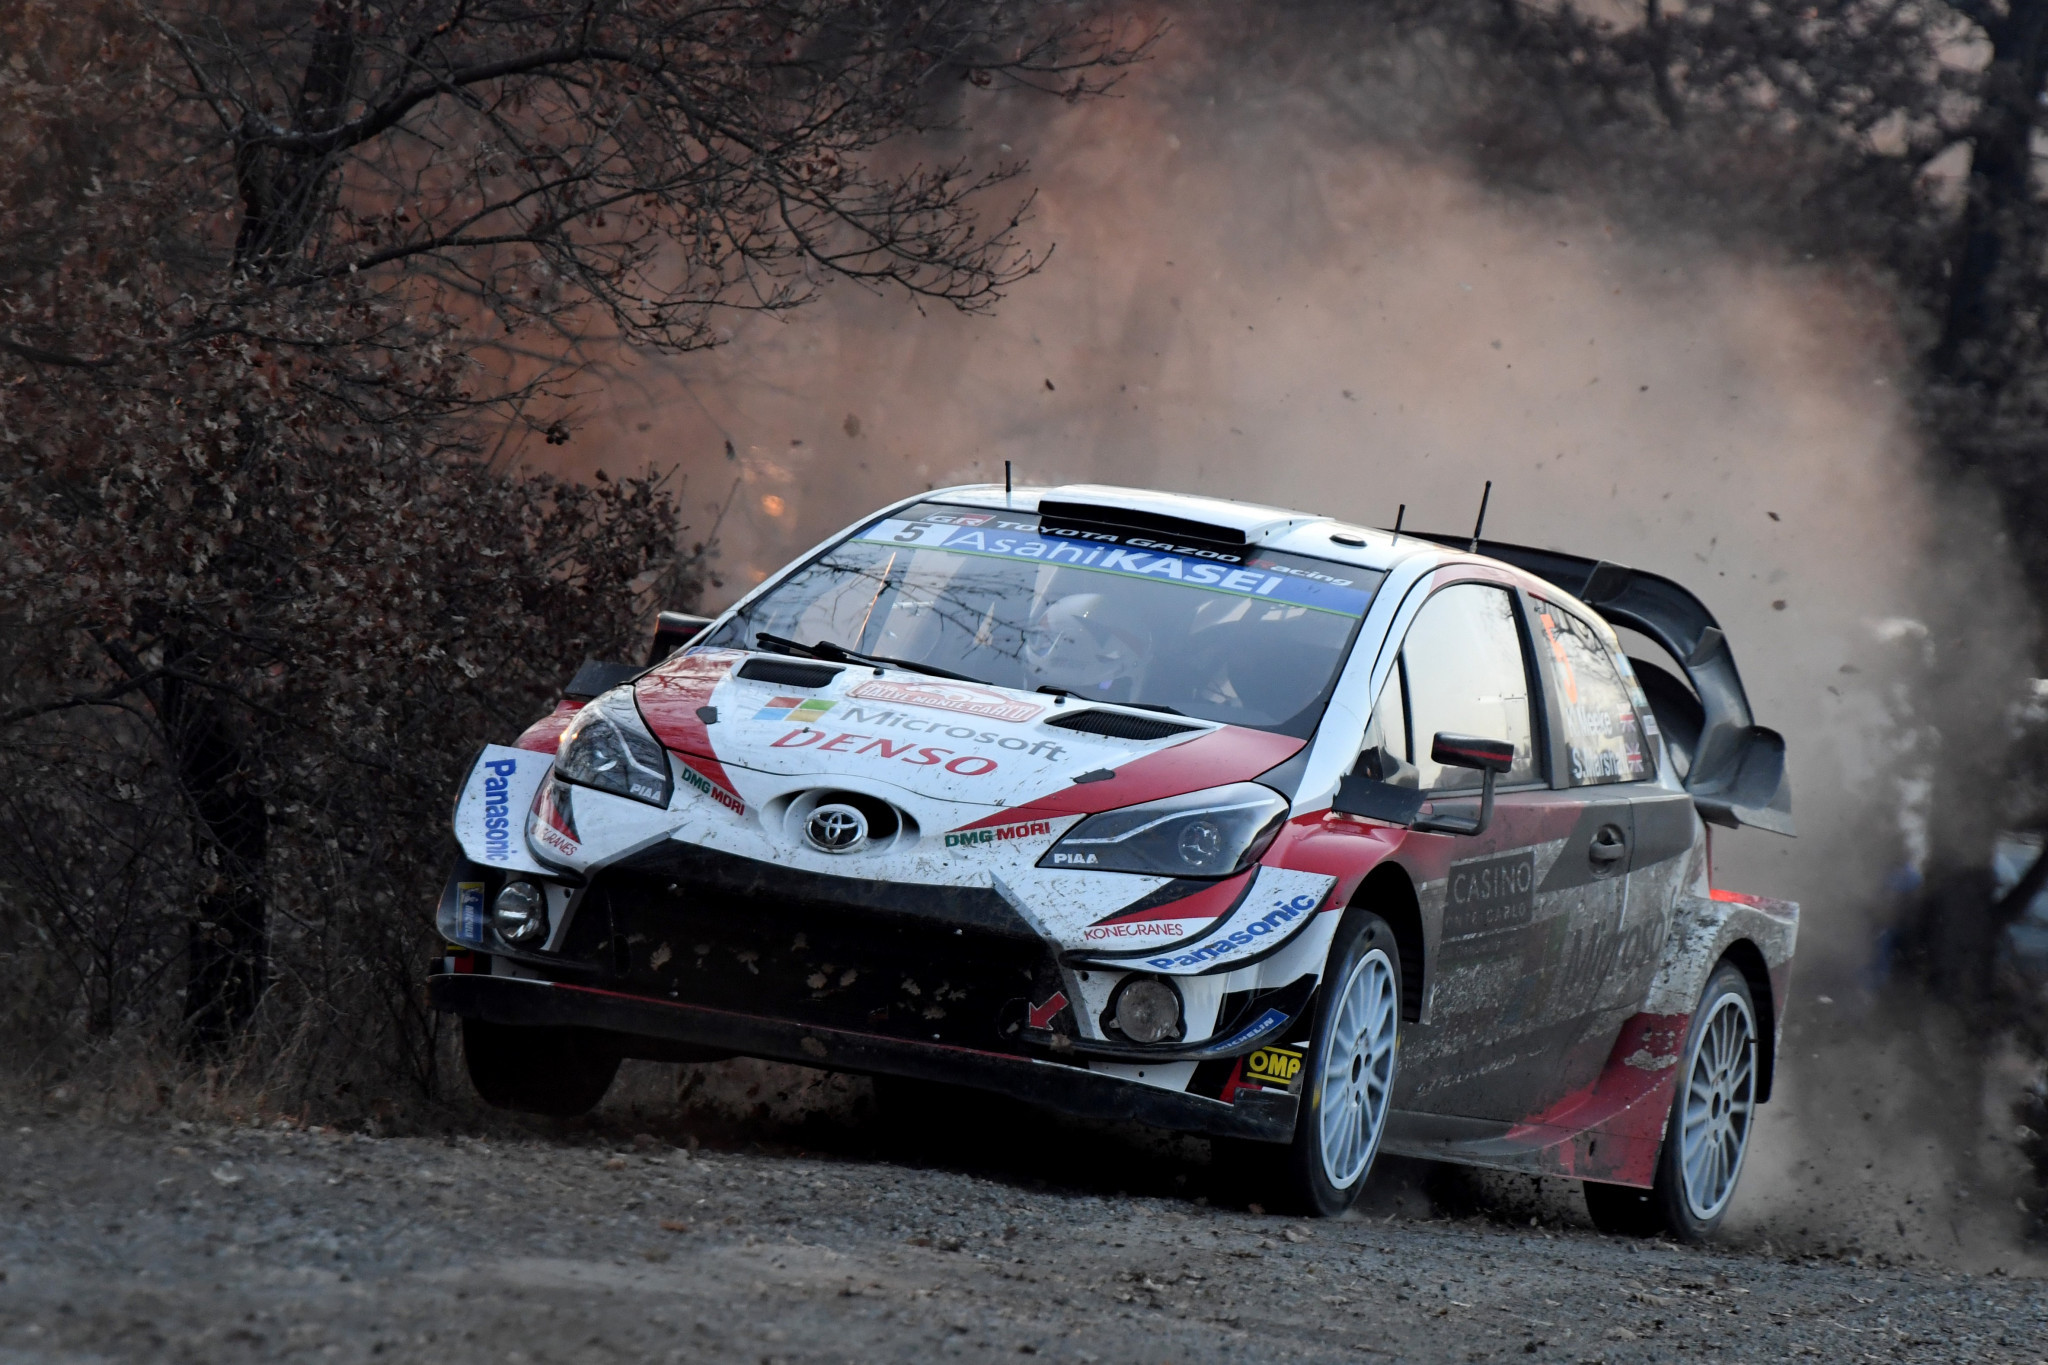 British rally driver banned for eight years after refusing to provide anti-doping sample